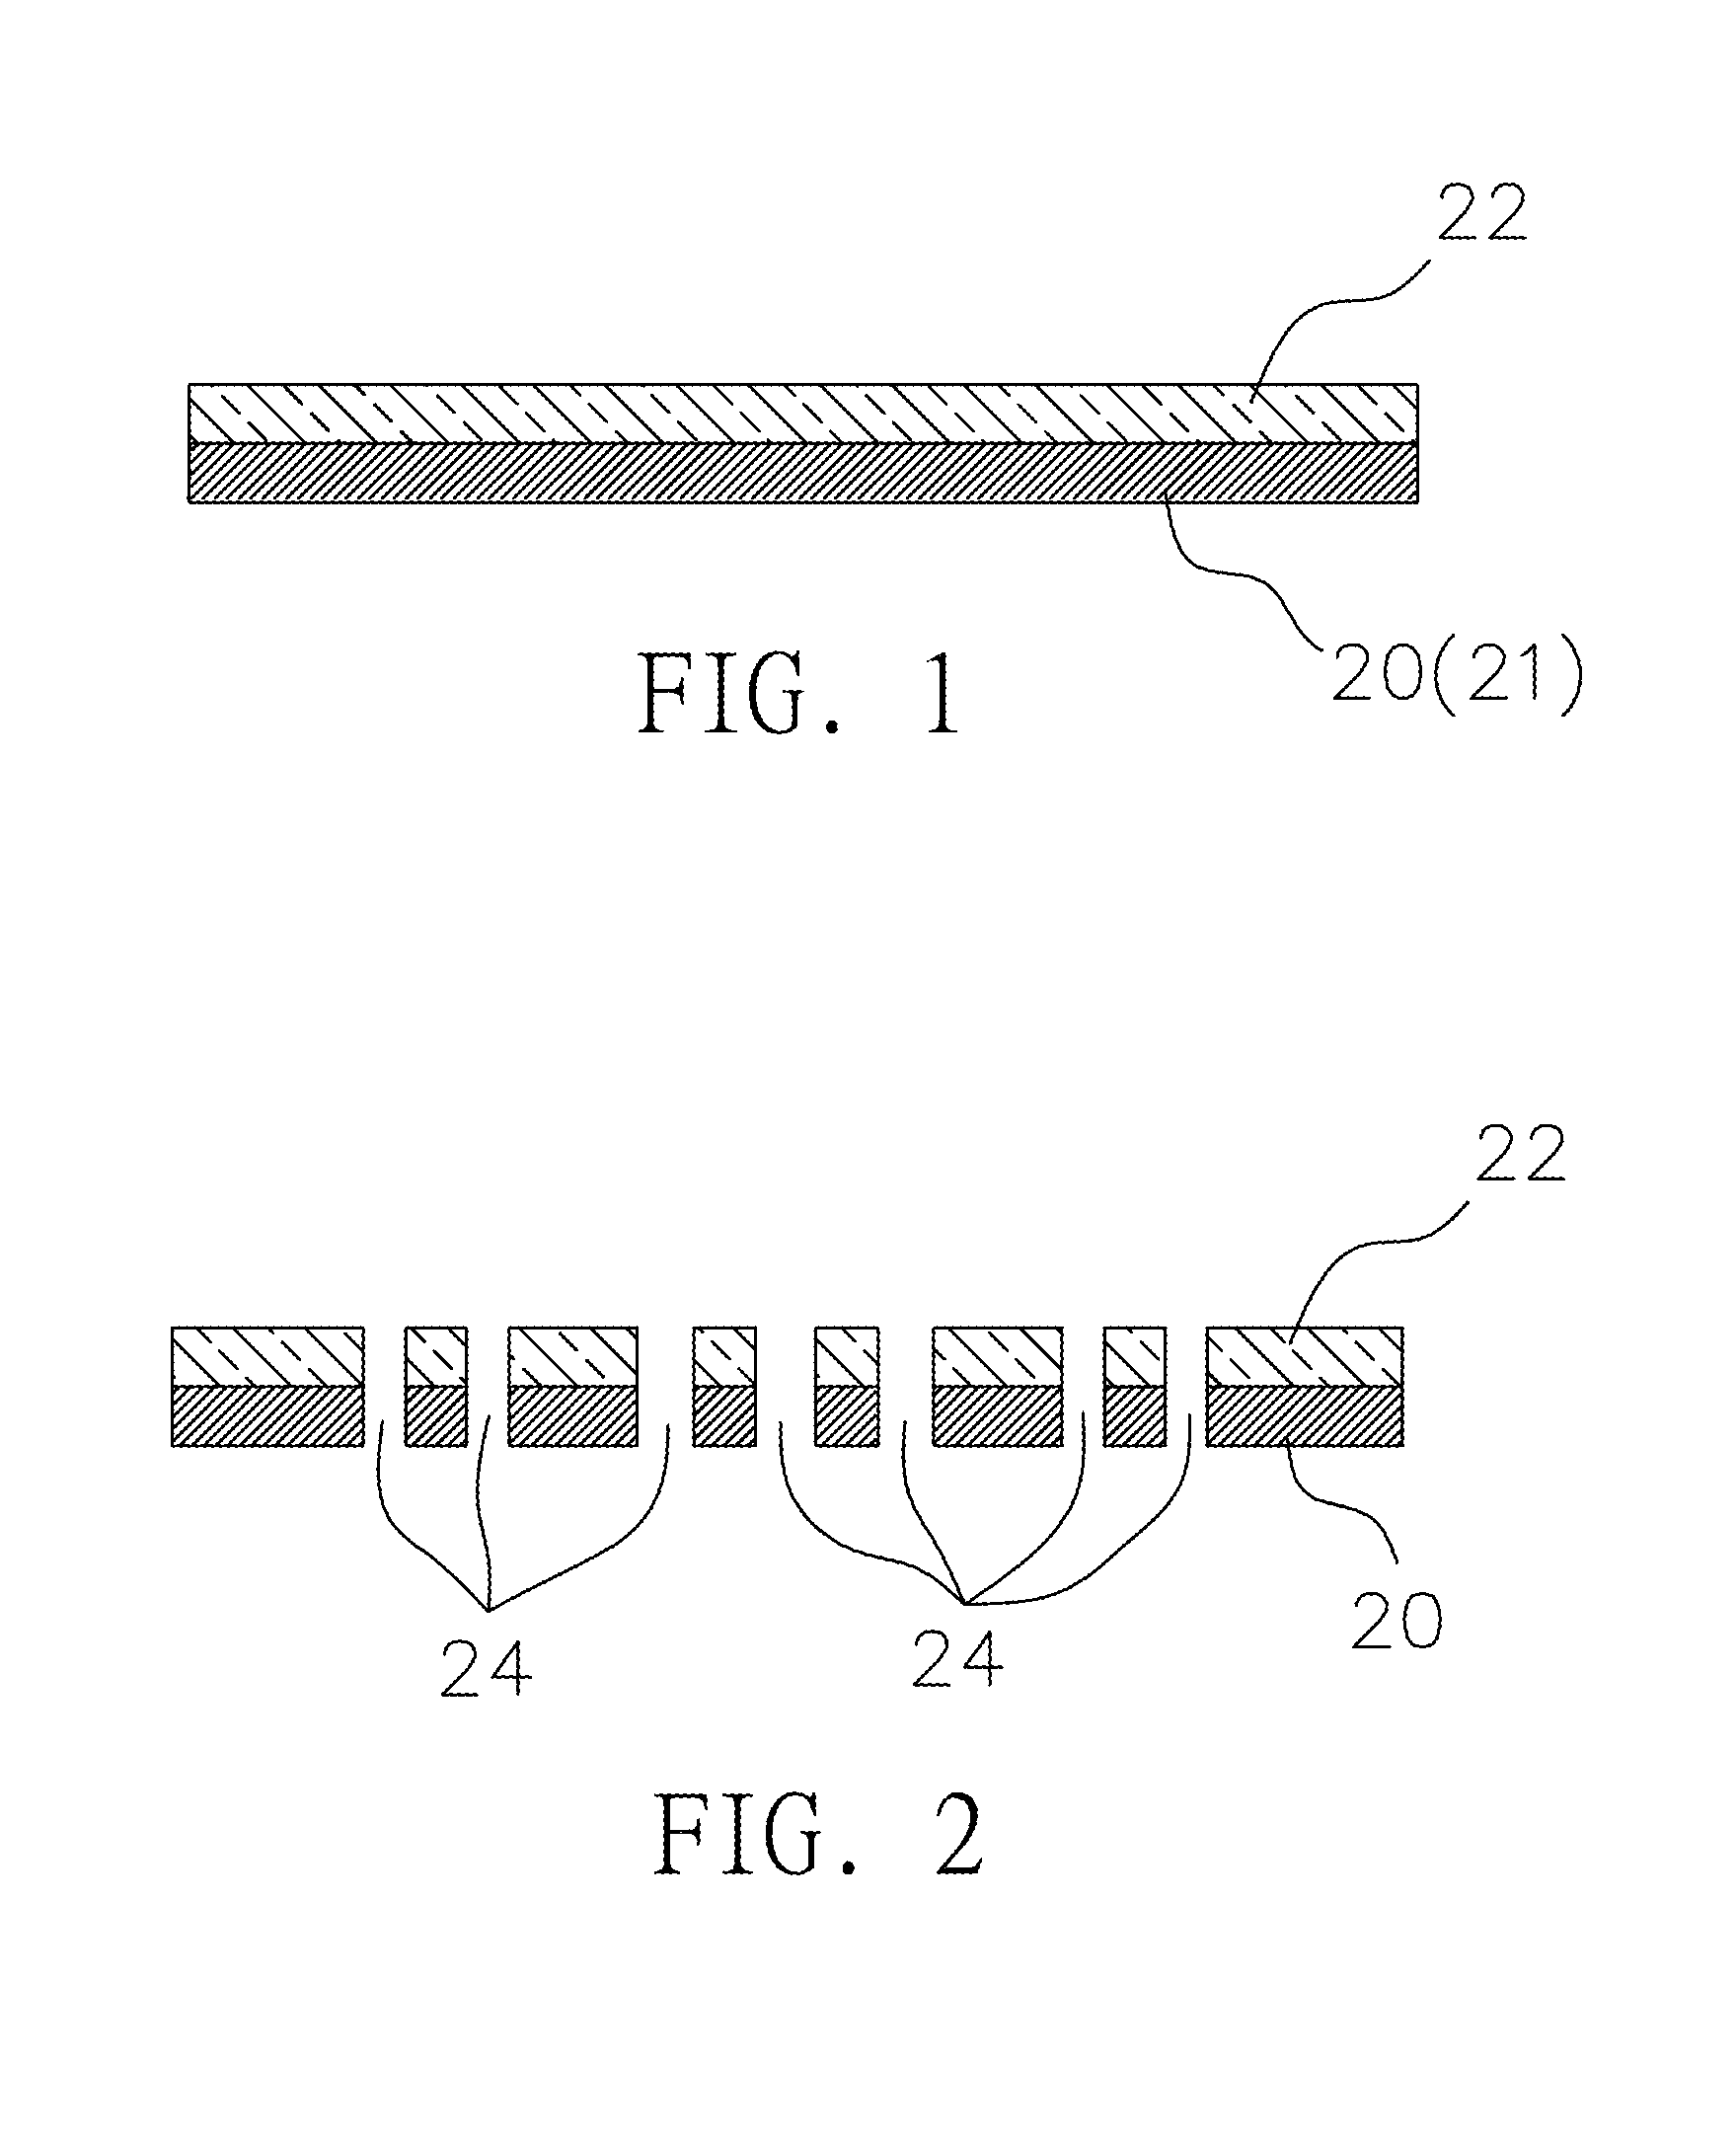 Method for directly attaching dielectric to circuit board with embedded electronic devices